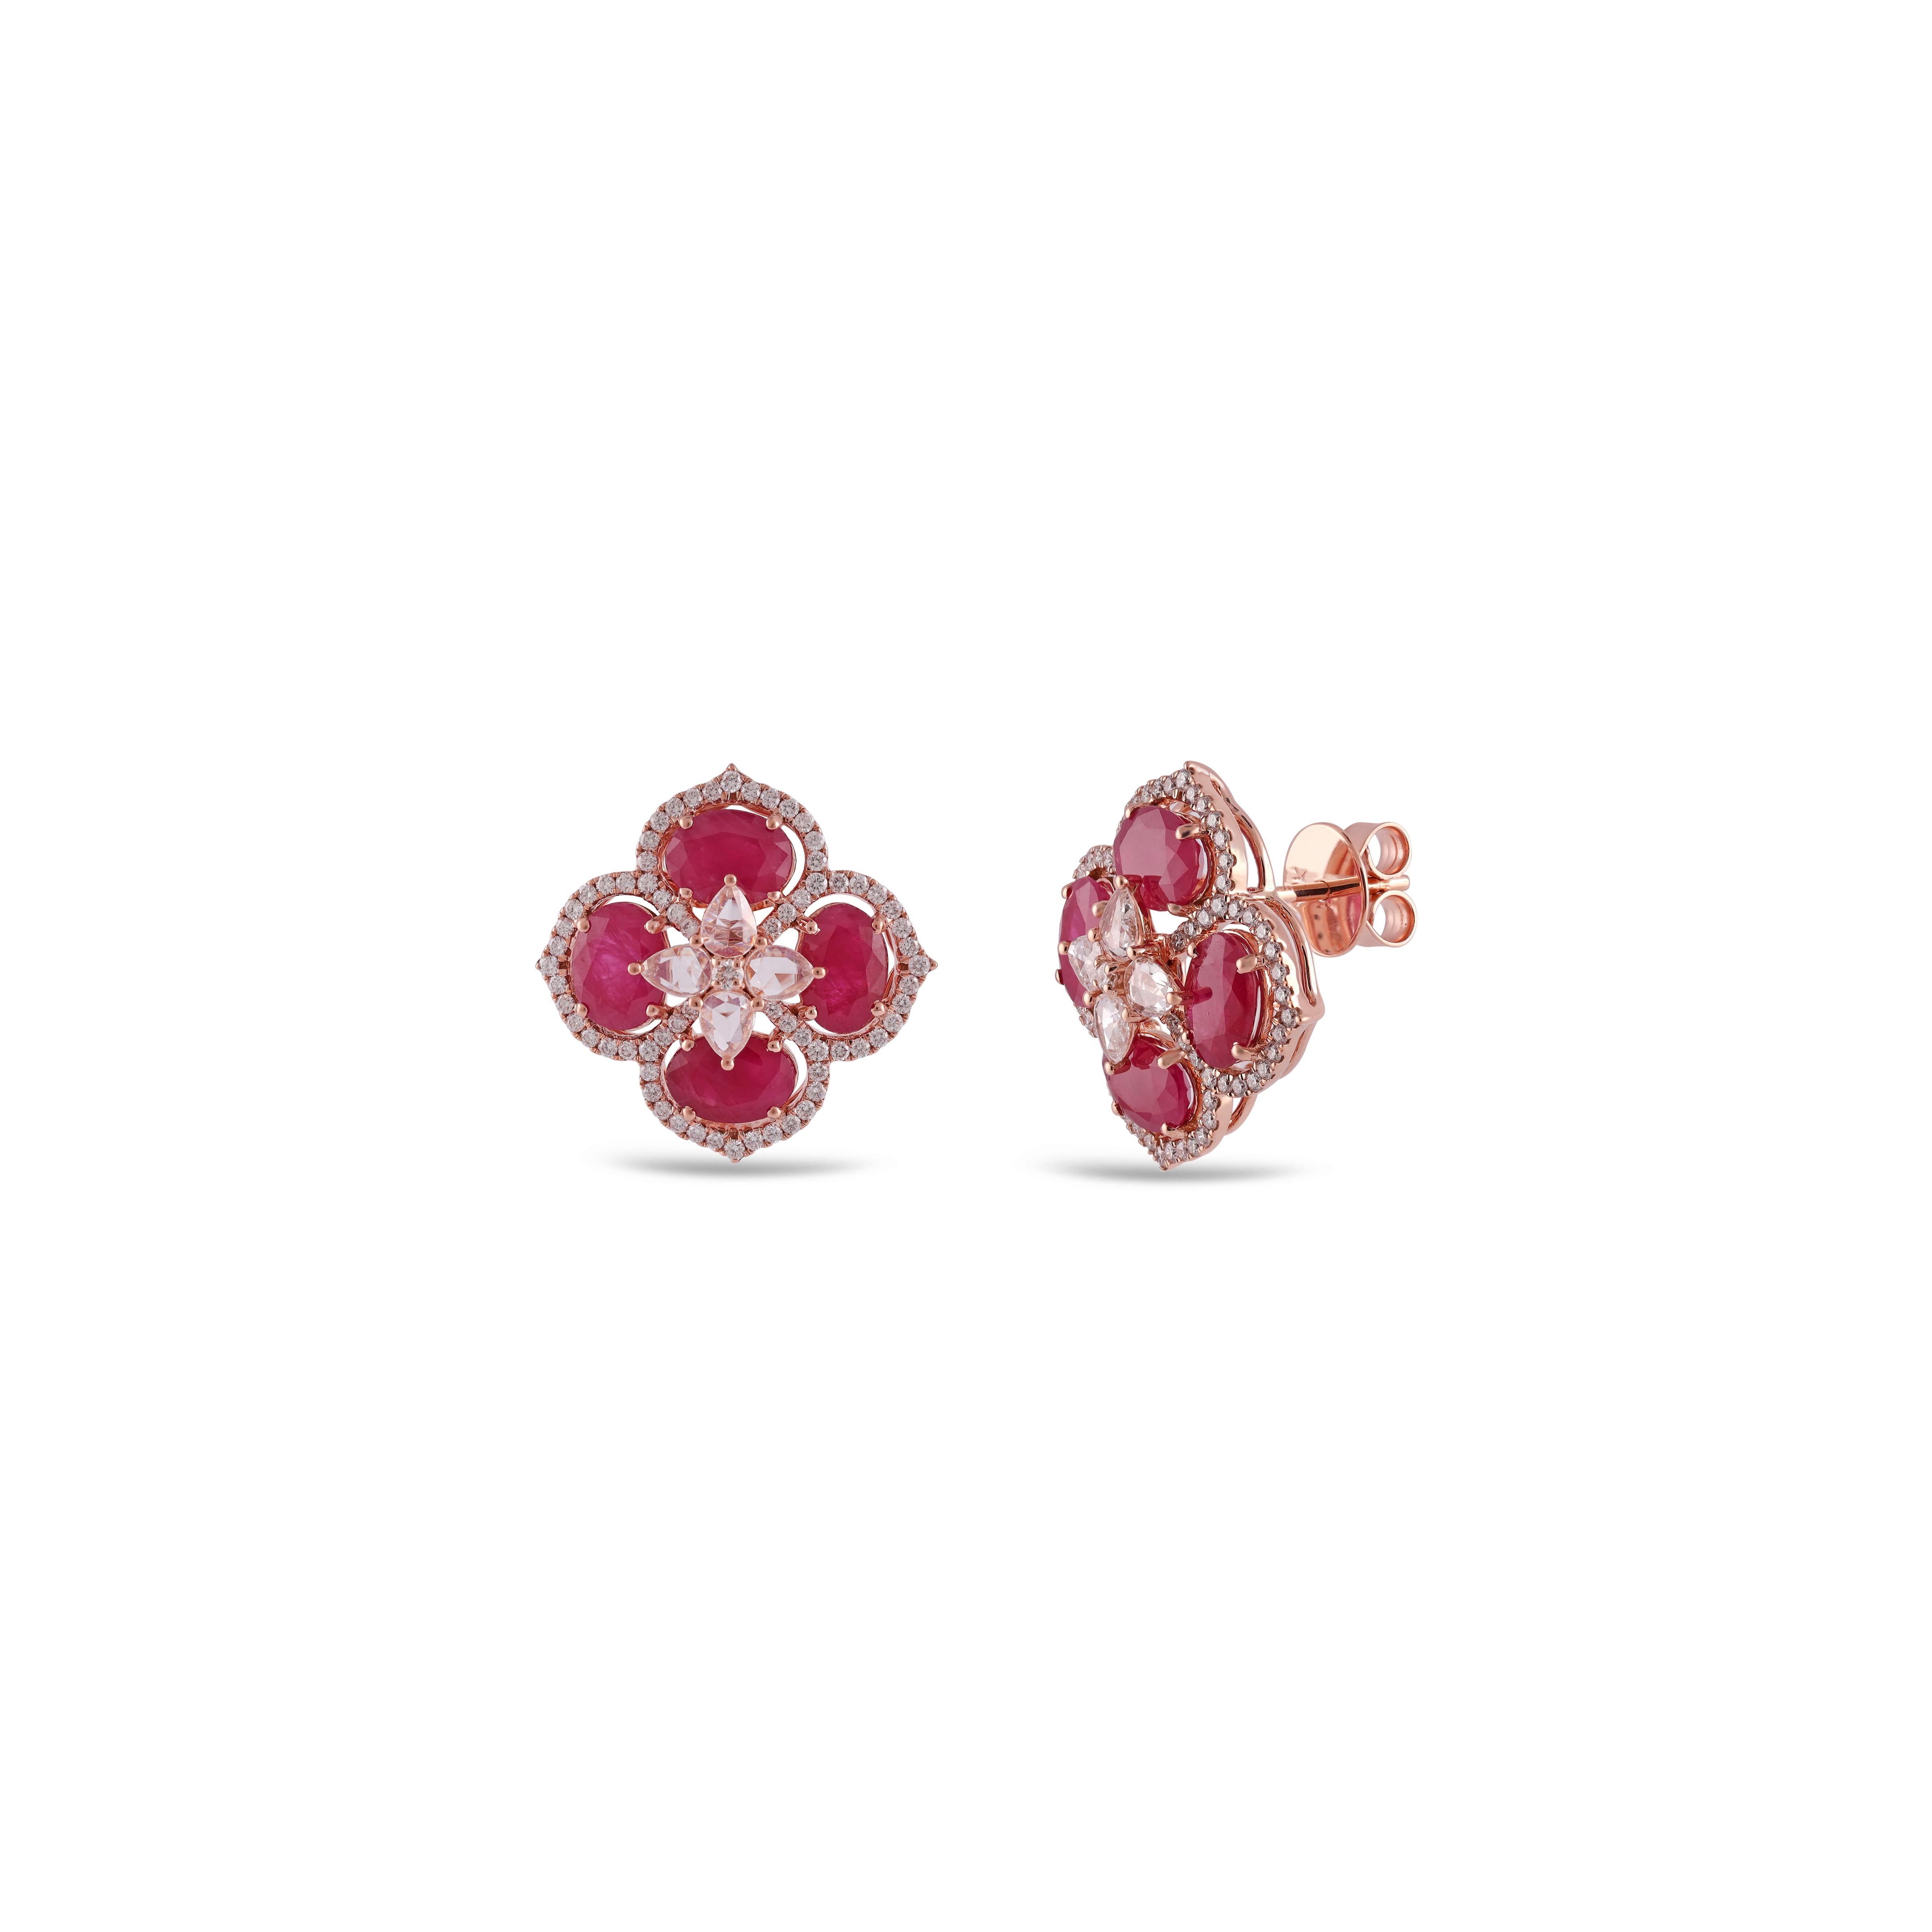 7.44 Carat Ruby Earrings in Rose Gold with Diamonds In New Condition For Sale In Jaipur, Rajasthan